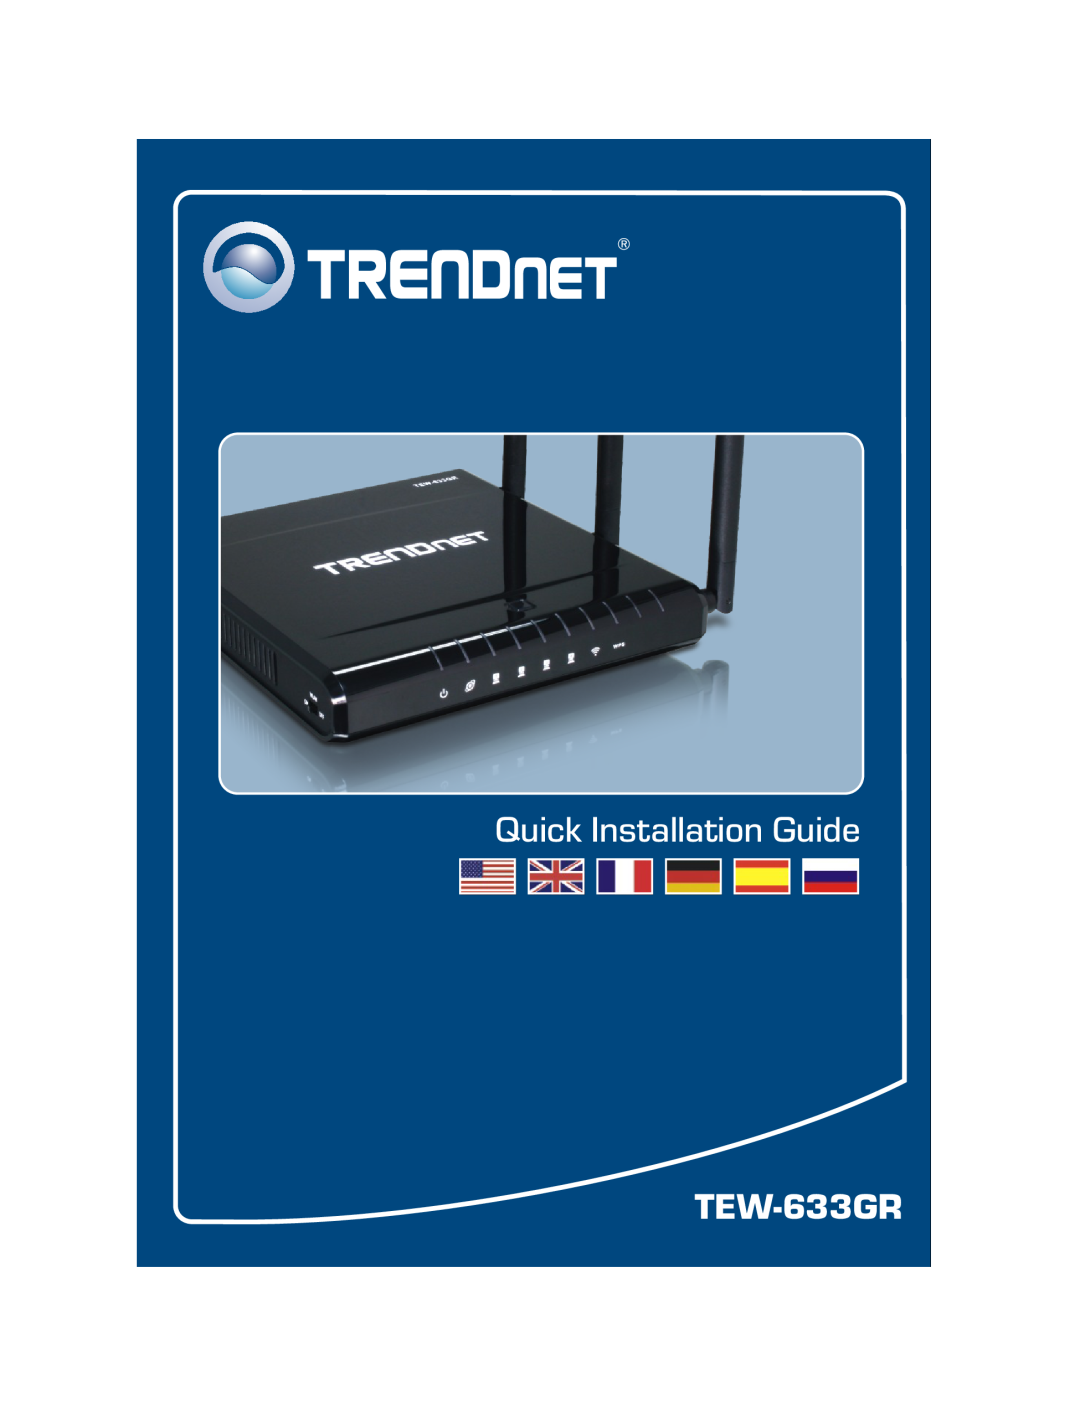 TRENDnet TEW-633GR manual Quick Installation Guide 